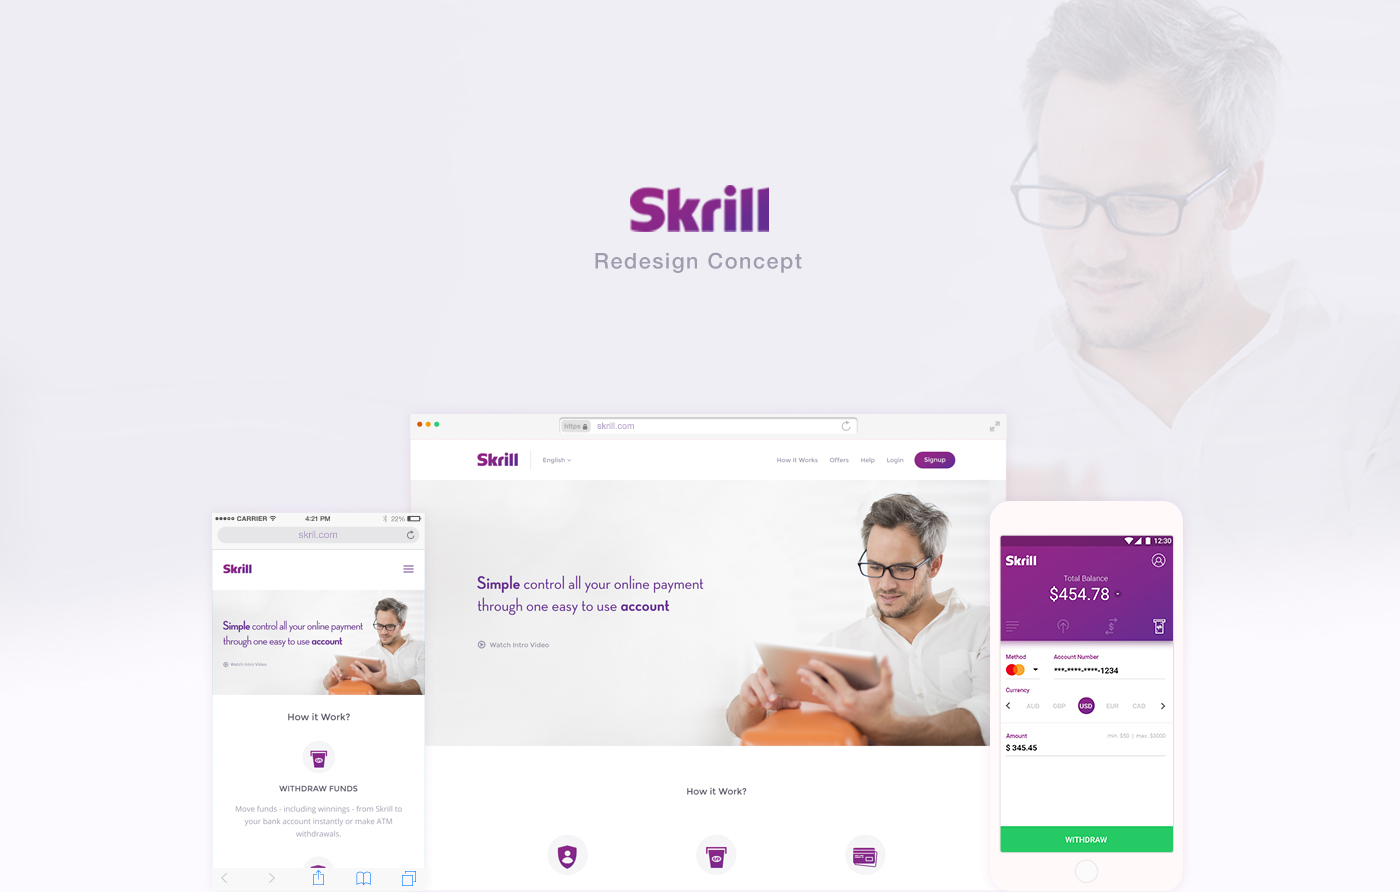 skrill redesign Responsive Mobileapps UI/UX concept Full Project Web Design  behance latest design featured